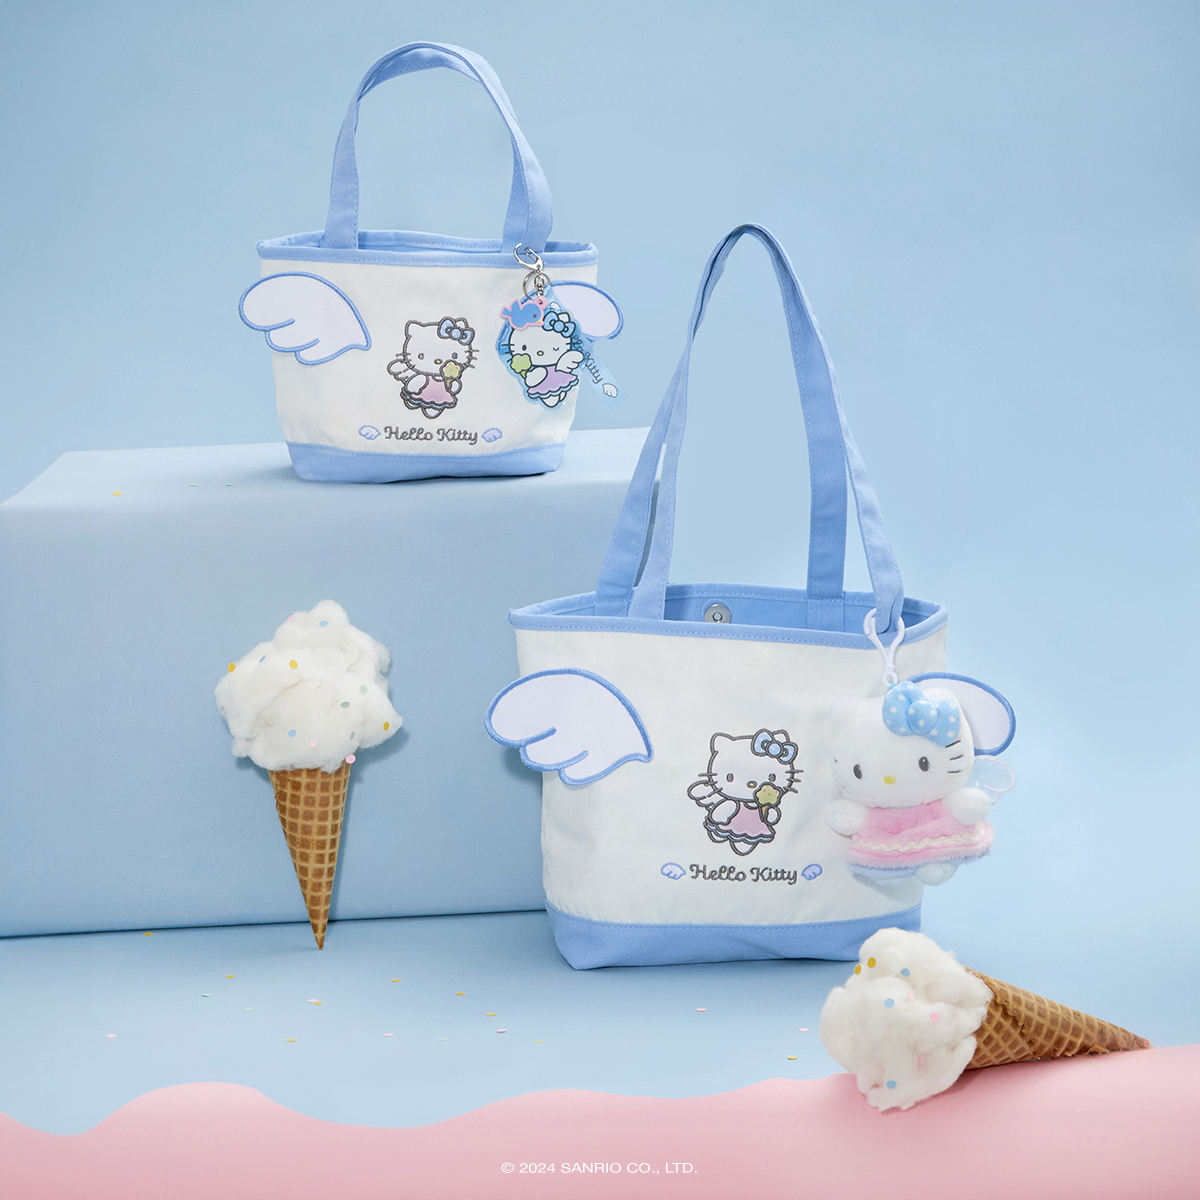 Ice cream dream 🍦 Take a journey with Hello Kitty and fly through the sky in this frozen wonderland! Shop new arrivals: sanrio.com/collections/ne…